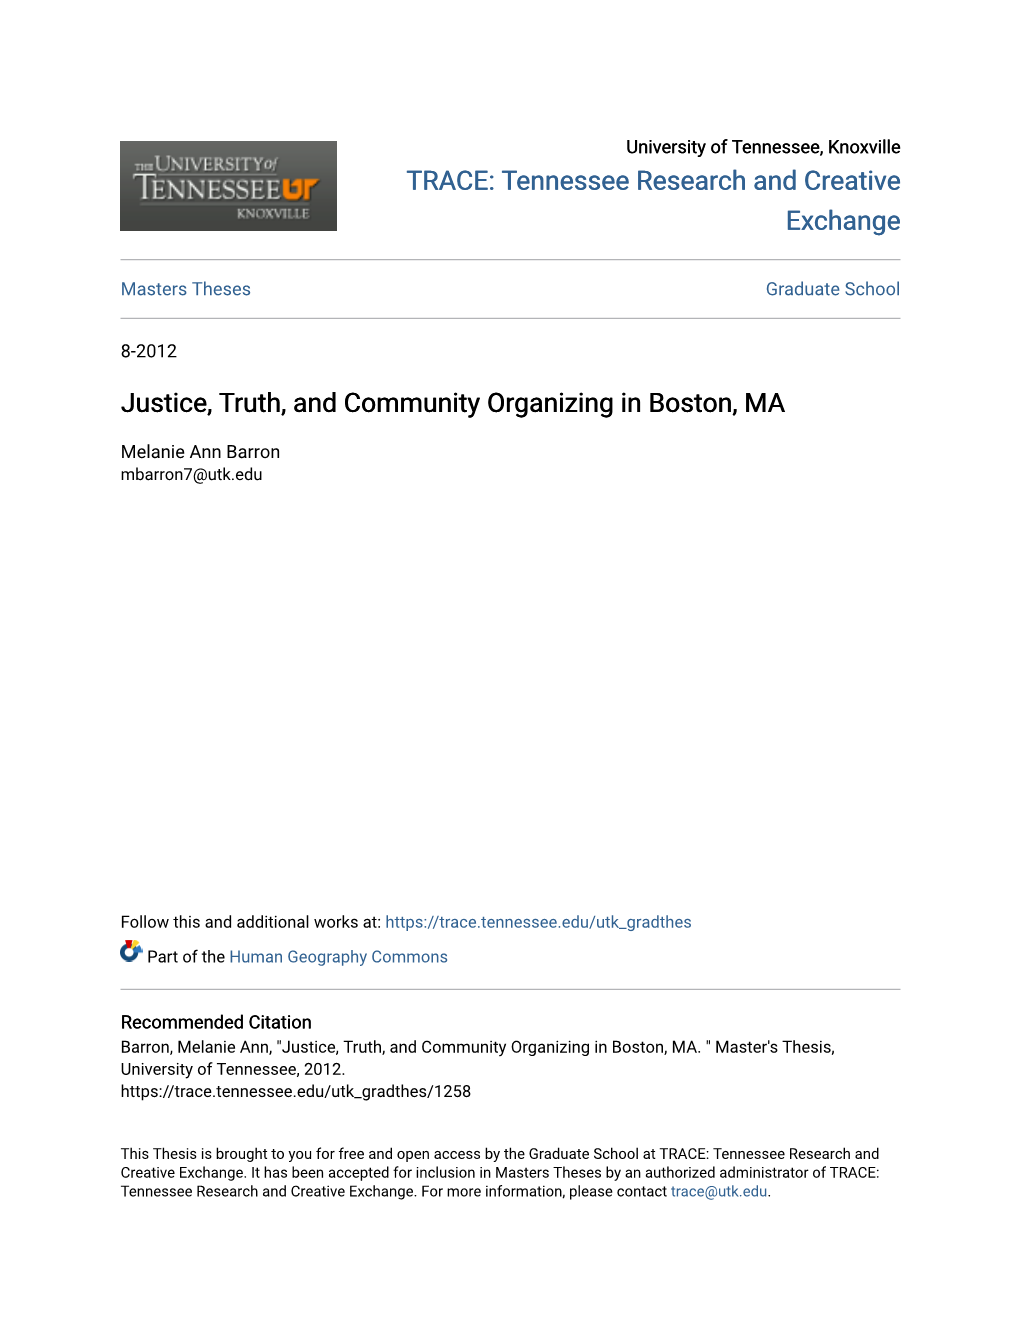 Justice, Truth, and Community Organizing in Boston, MA